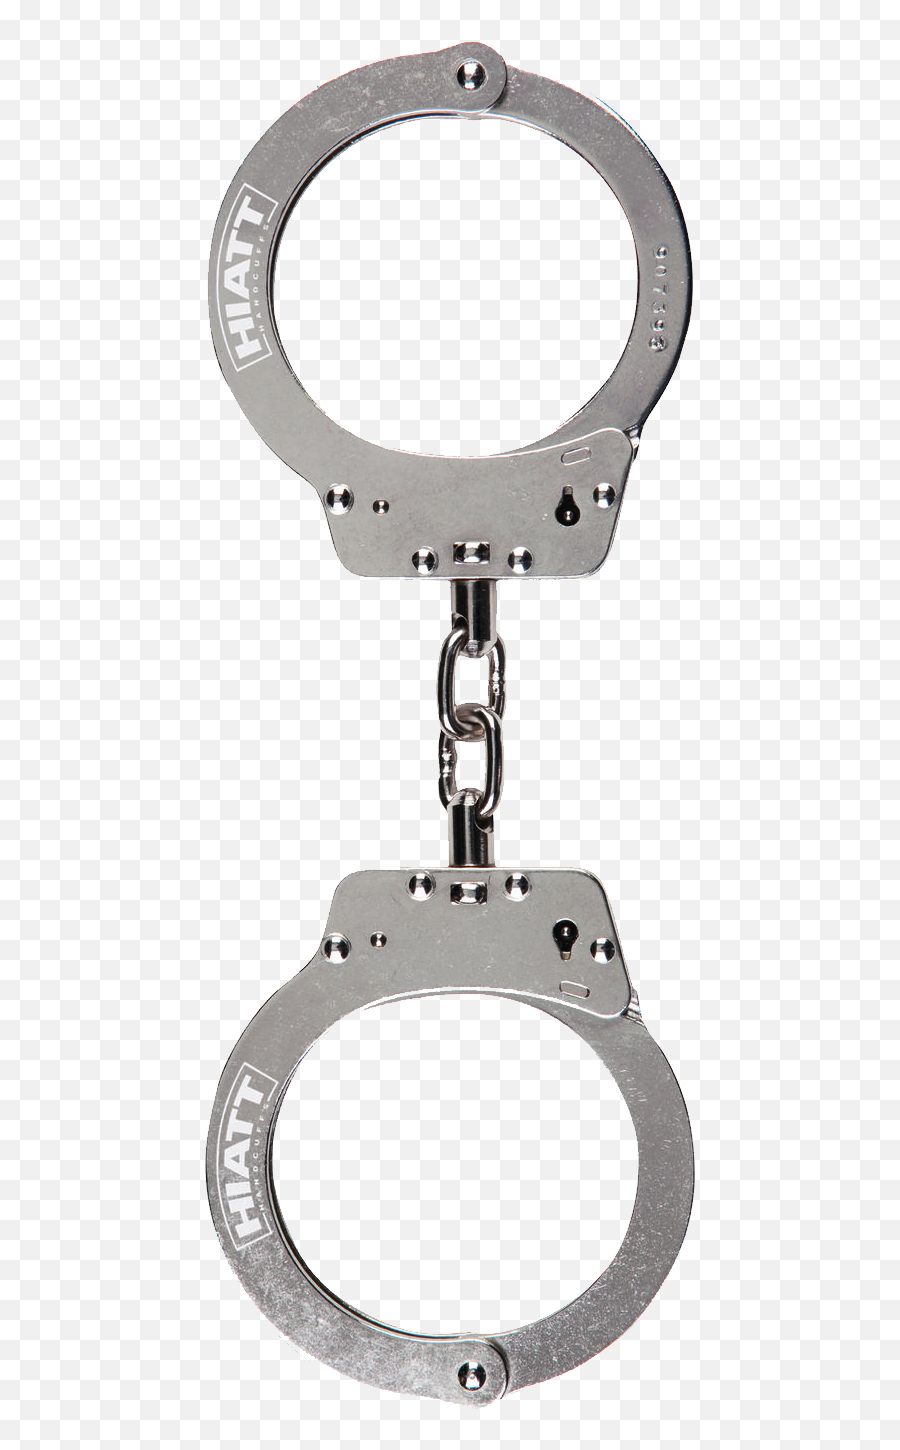 Handcuffs Icon Web Icons Png - Transparent Handcuffs,Handcuffs Transparent Background